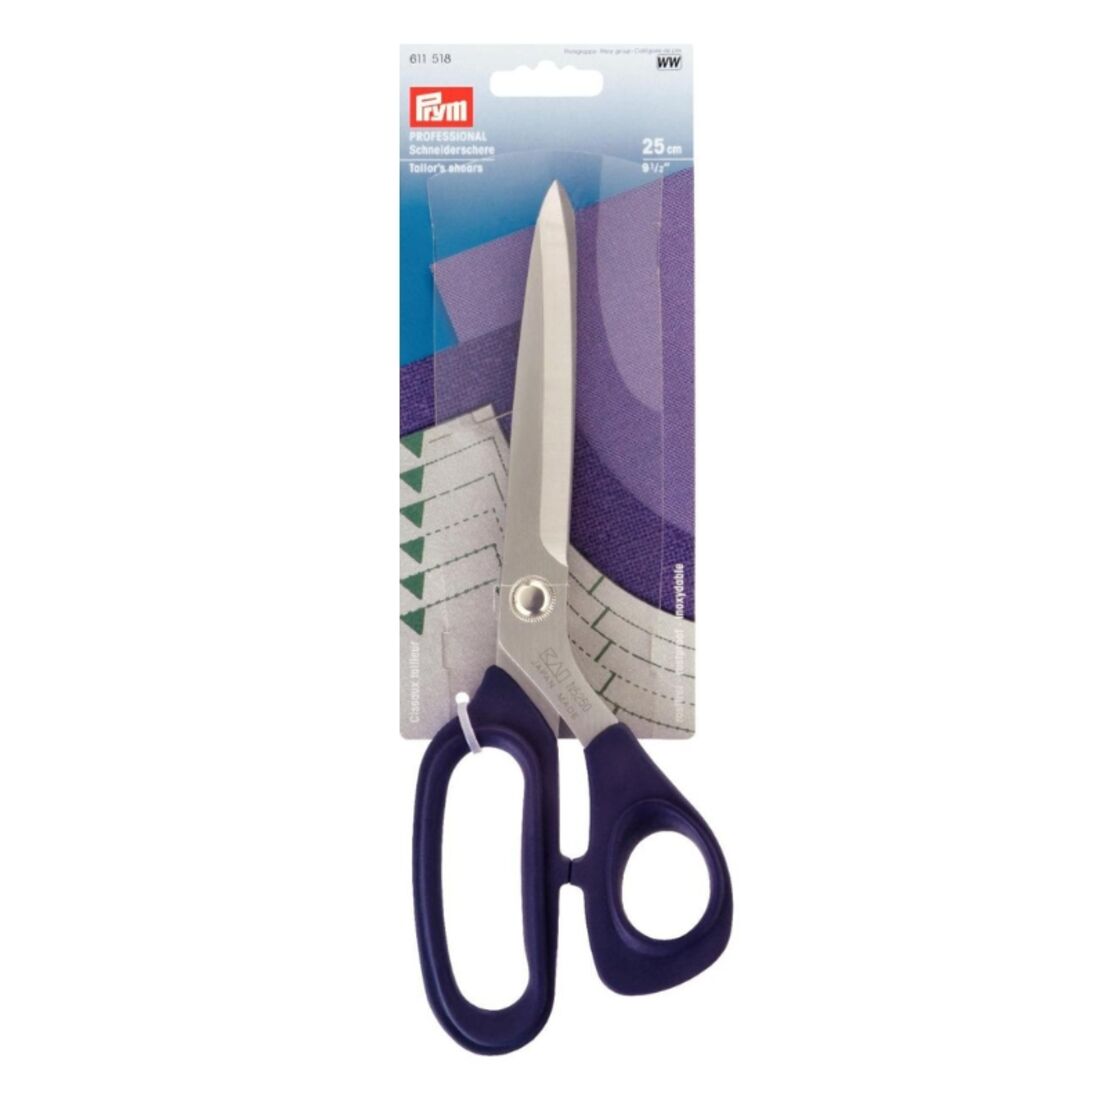 https://www.croftmill.co.uk/images/pictures/2022/haberdashery/prym_professional_tailor-s_shears-(560x560).jpg?v=a3a0a61c